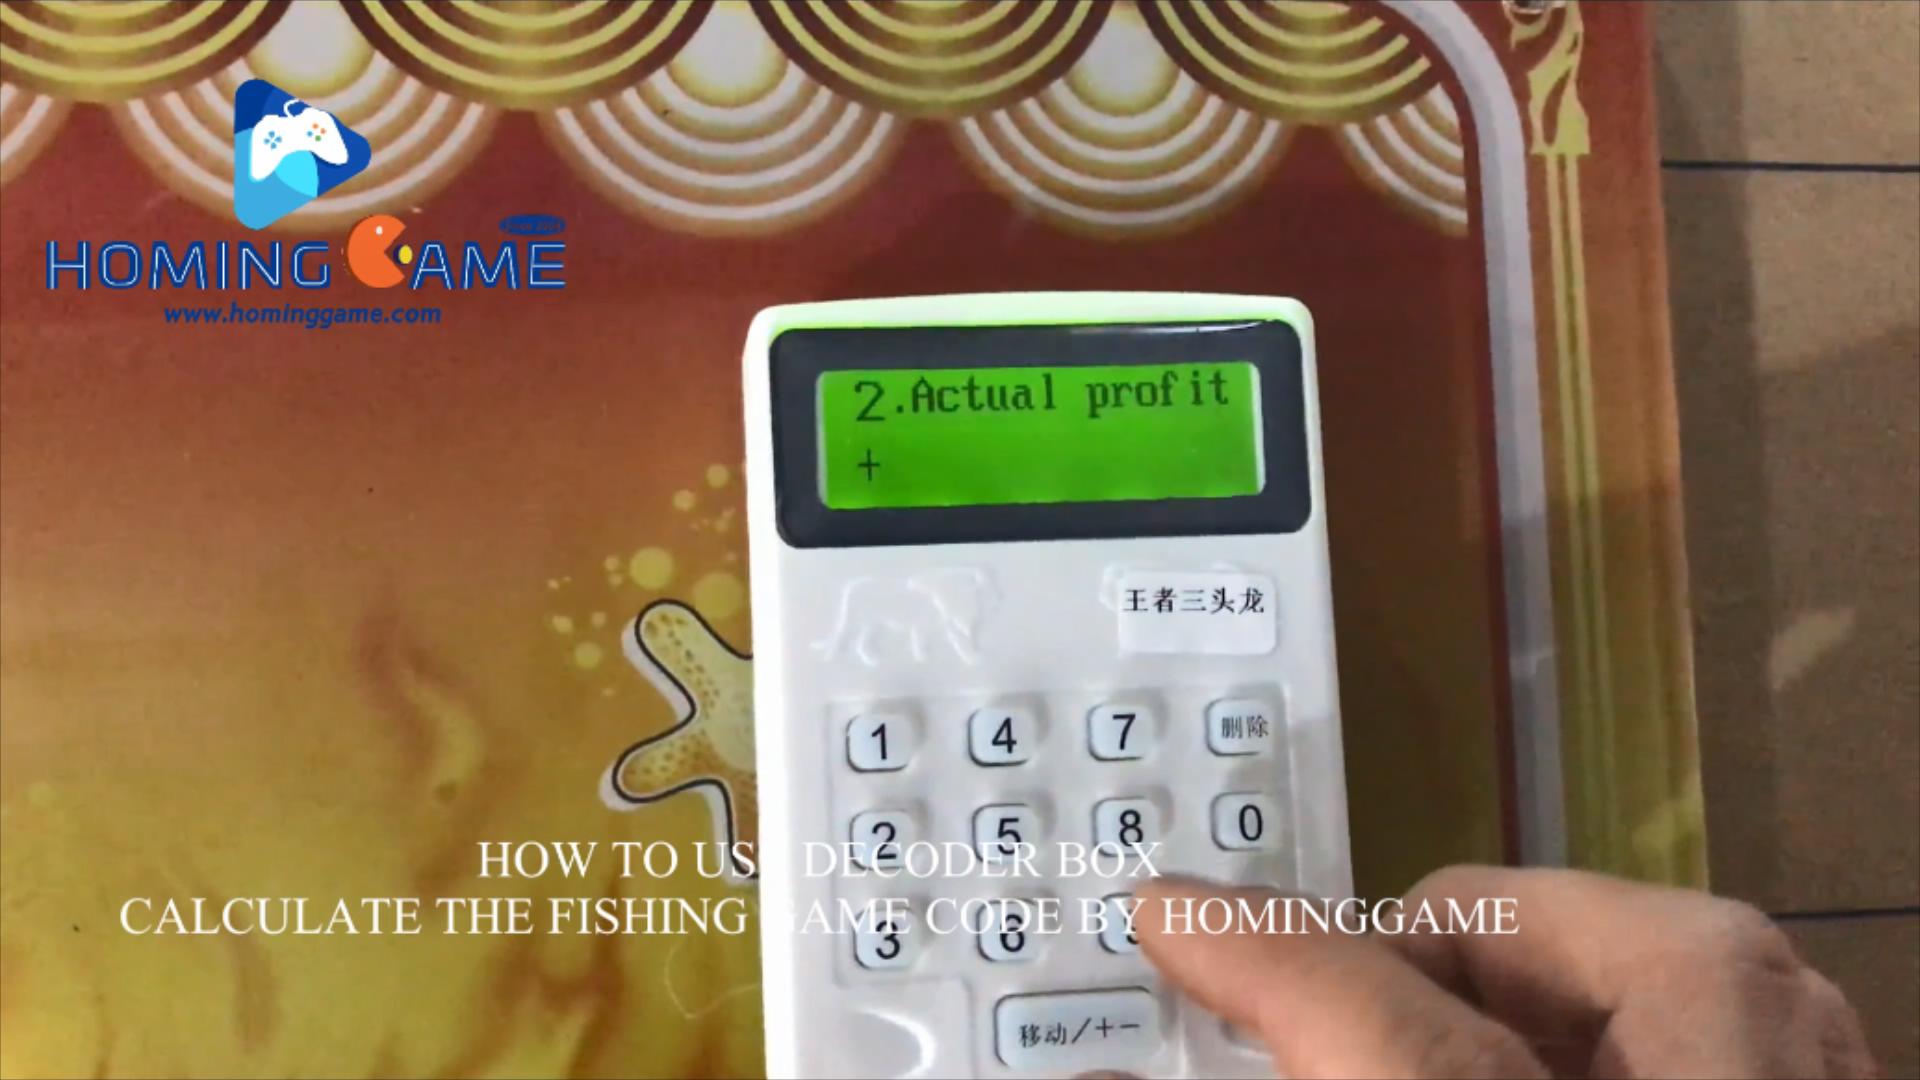 How to use the decoder box to calculate the Godzilla1,2,3,Aliens Vs Termination,Rampage,Dragon Legend,Dragon Slayer,zombie Awaken fishing game code by HomingGame(Order Call Whatsapp:+8618688409495),specialize in manufacturing and supplying fishing game,fishing table,fishing table game machine,fishing game machine,fishing arcade game machine,fish hunter fishing game machine,upright table fishing game machine,standup fishing game machine,ocean king 3 fishing game machine,capatian america fishing game machine,tiger stirke fishing game machine,godzilla fishing game machine,rampage fishing game machine,dragon legend fishing game machine,ocean king,igs fishing game machine,electrical fishing game machine,usa fishing game machine,ocean king 2 fishing gam emachine,fishing game machine supplier,fishing game machine manufacturer,gaming machine,gambling machine,game machine,arcade game machine,coin operated game machine,indoor game machine,electrical game machine,amusement park game equipment,amusement machine,gaming,casino gaming machine,usa fishing game machine supplier,USA fishing table game machine manufacturer,fishing game cheats,fishing game skills,how to paly the fishing game machine,fishing game decoding,fishing game decoder box,hominggame,www.gametube.hk,hominggame fishing game,entertainment game machine,family entertainment game machine,arcade game machine for sale